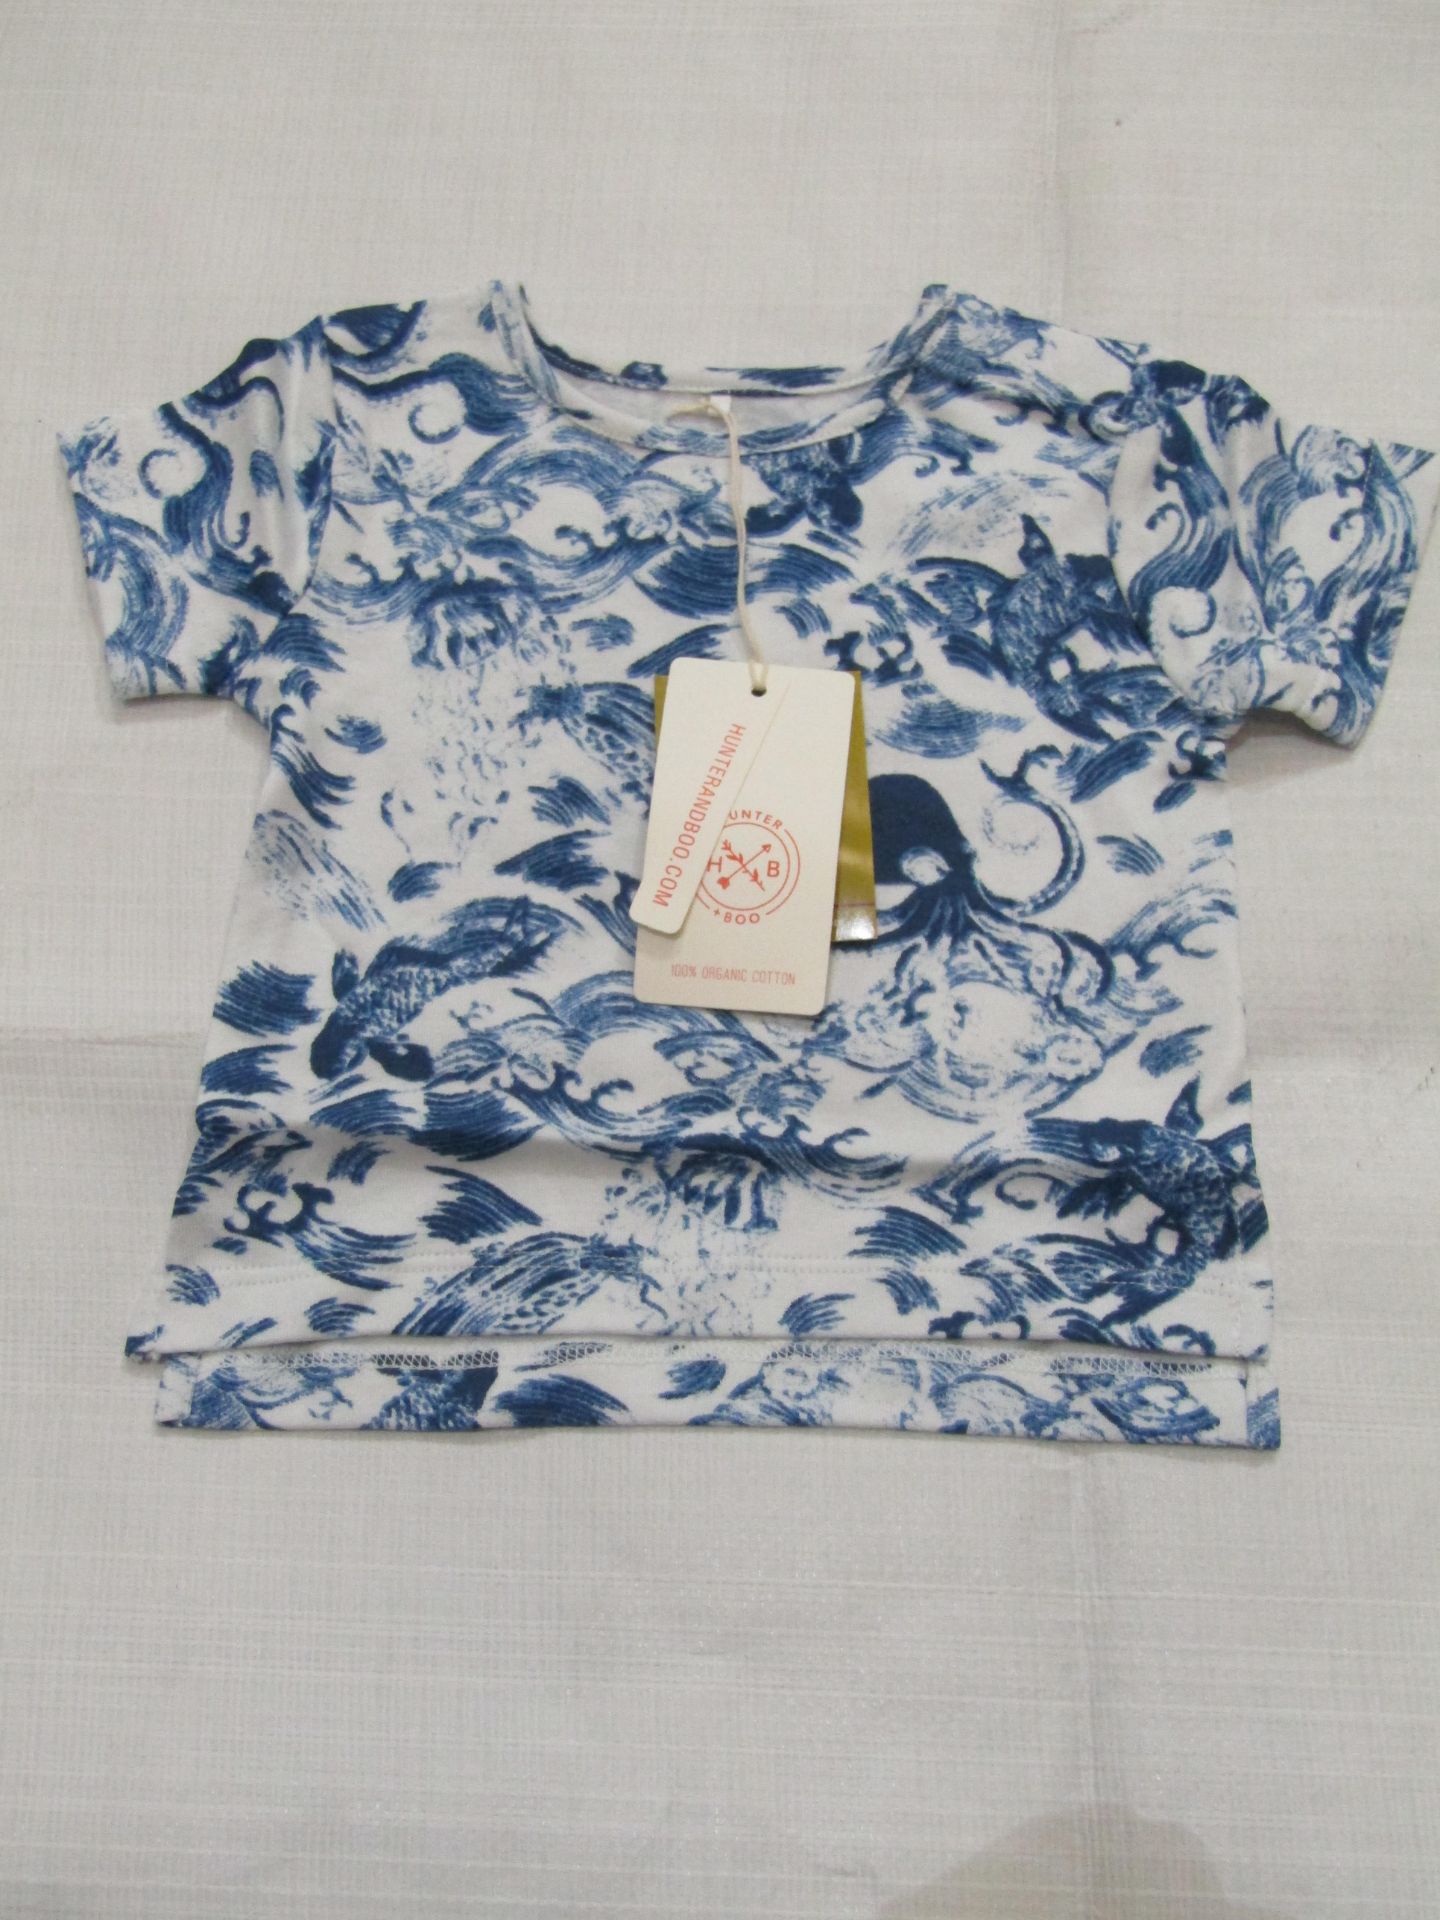 2 X Hunter & Boo Kayio Print T/Shirts Blue/White Aged 3-6 Months New & Packaged RRP œ13 Each